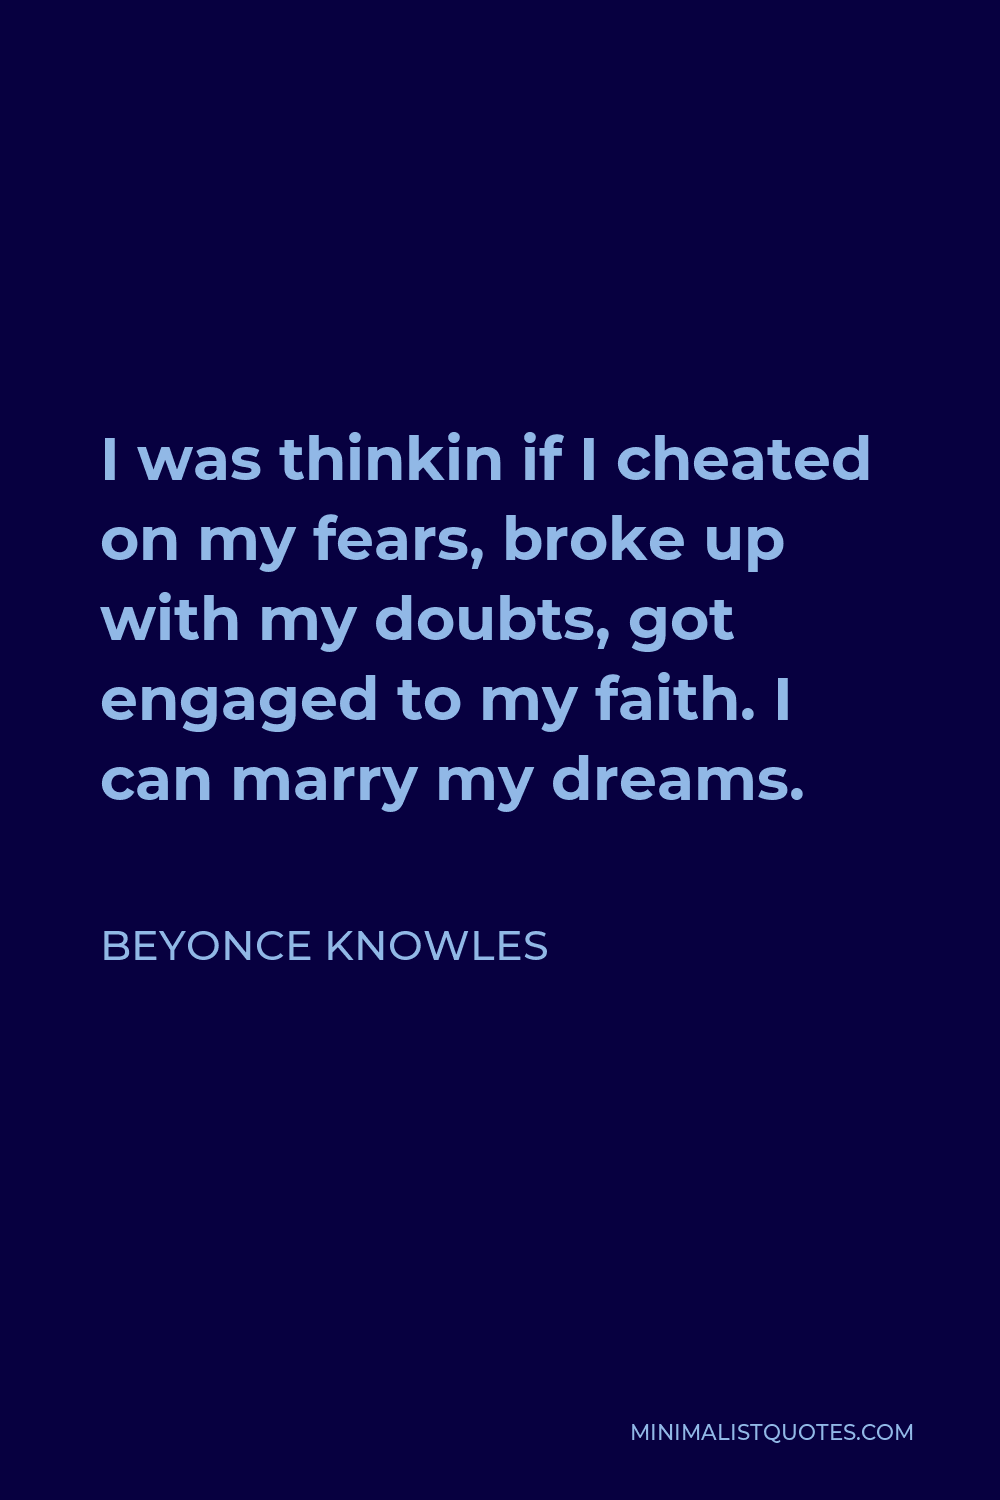 Beyonce Knowles Quote - I was thinkin if I cheated on my fears, broke up with my doubts, got engaged to my faith. I can marry my dreams.